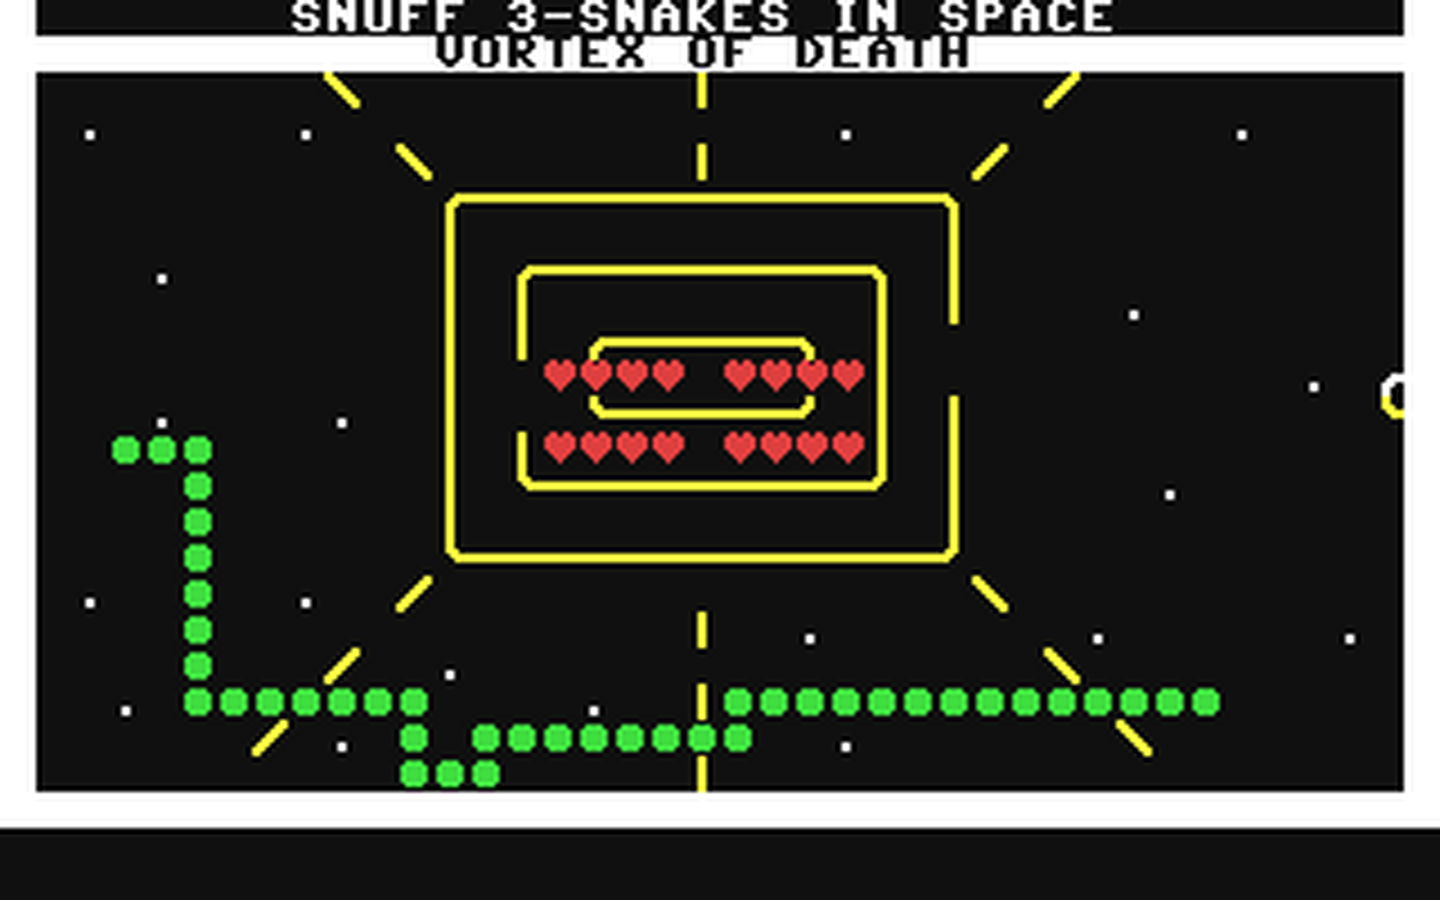 C64 GameBase Snuff_3_-_Snakes_in_Space